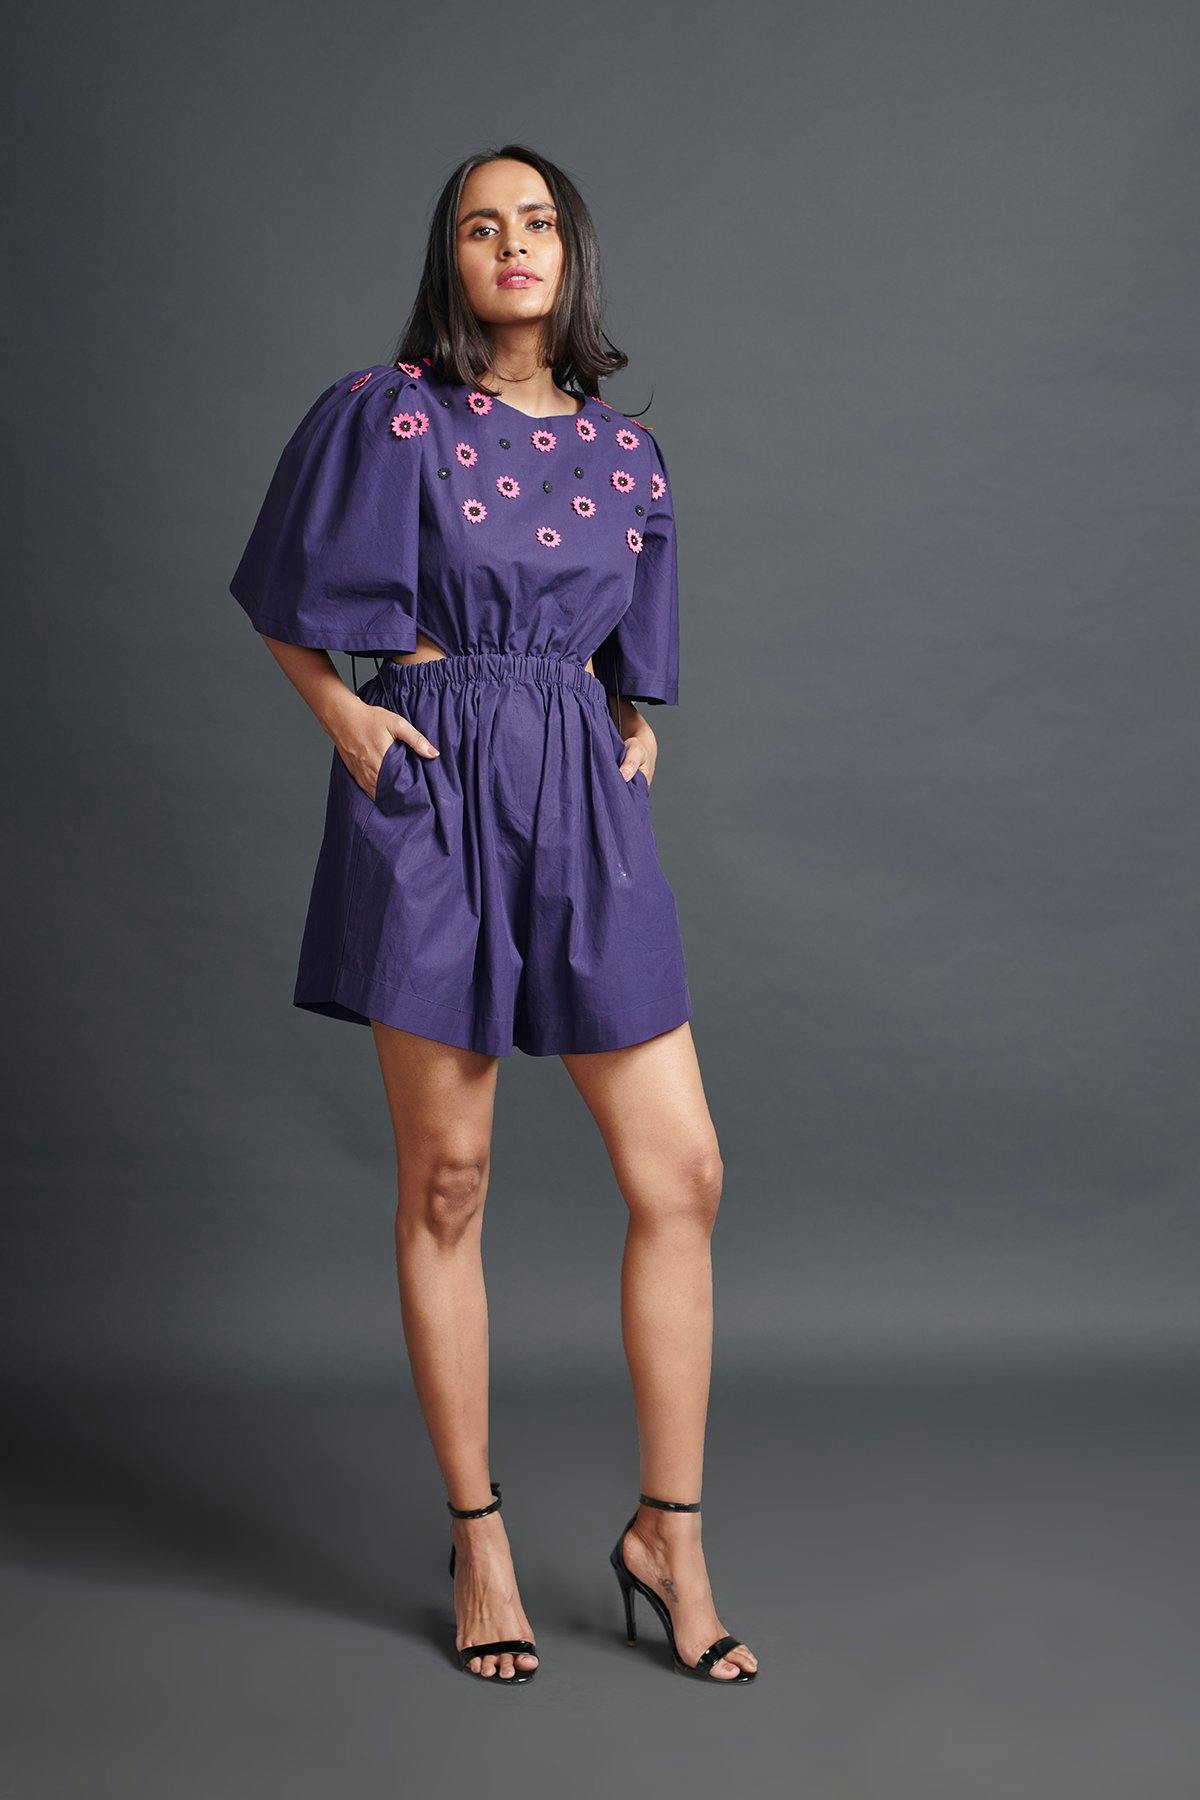 purple backless playsuit with embroidery, a product by Deepika Arora